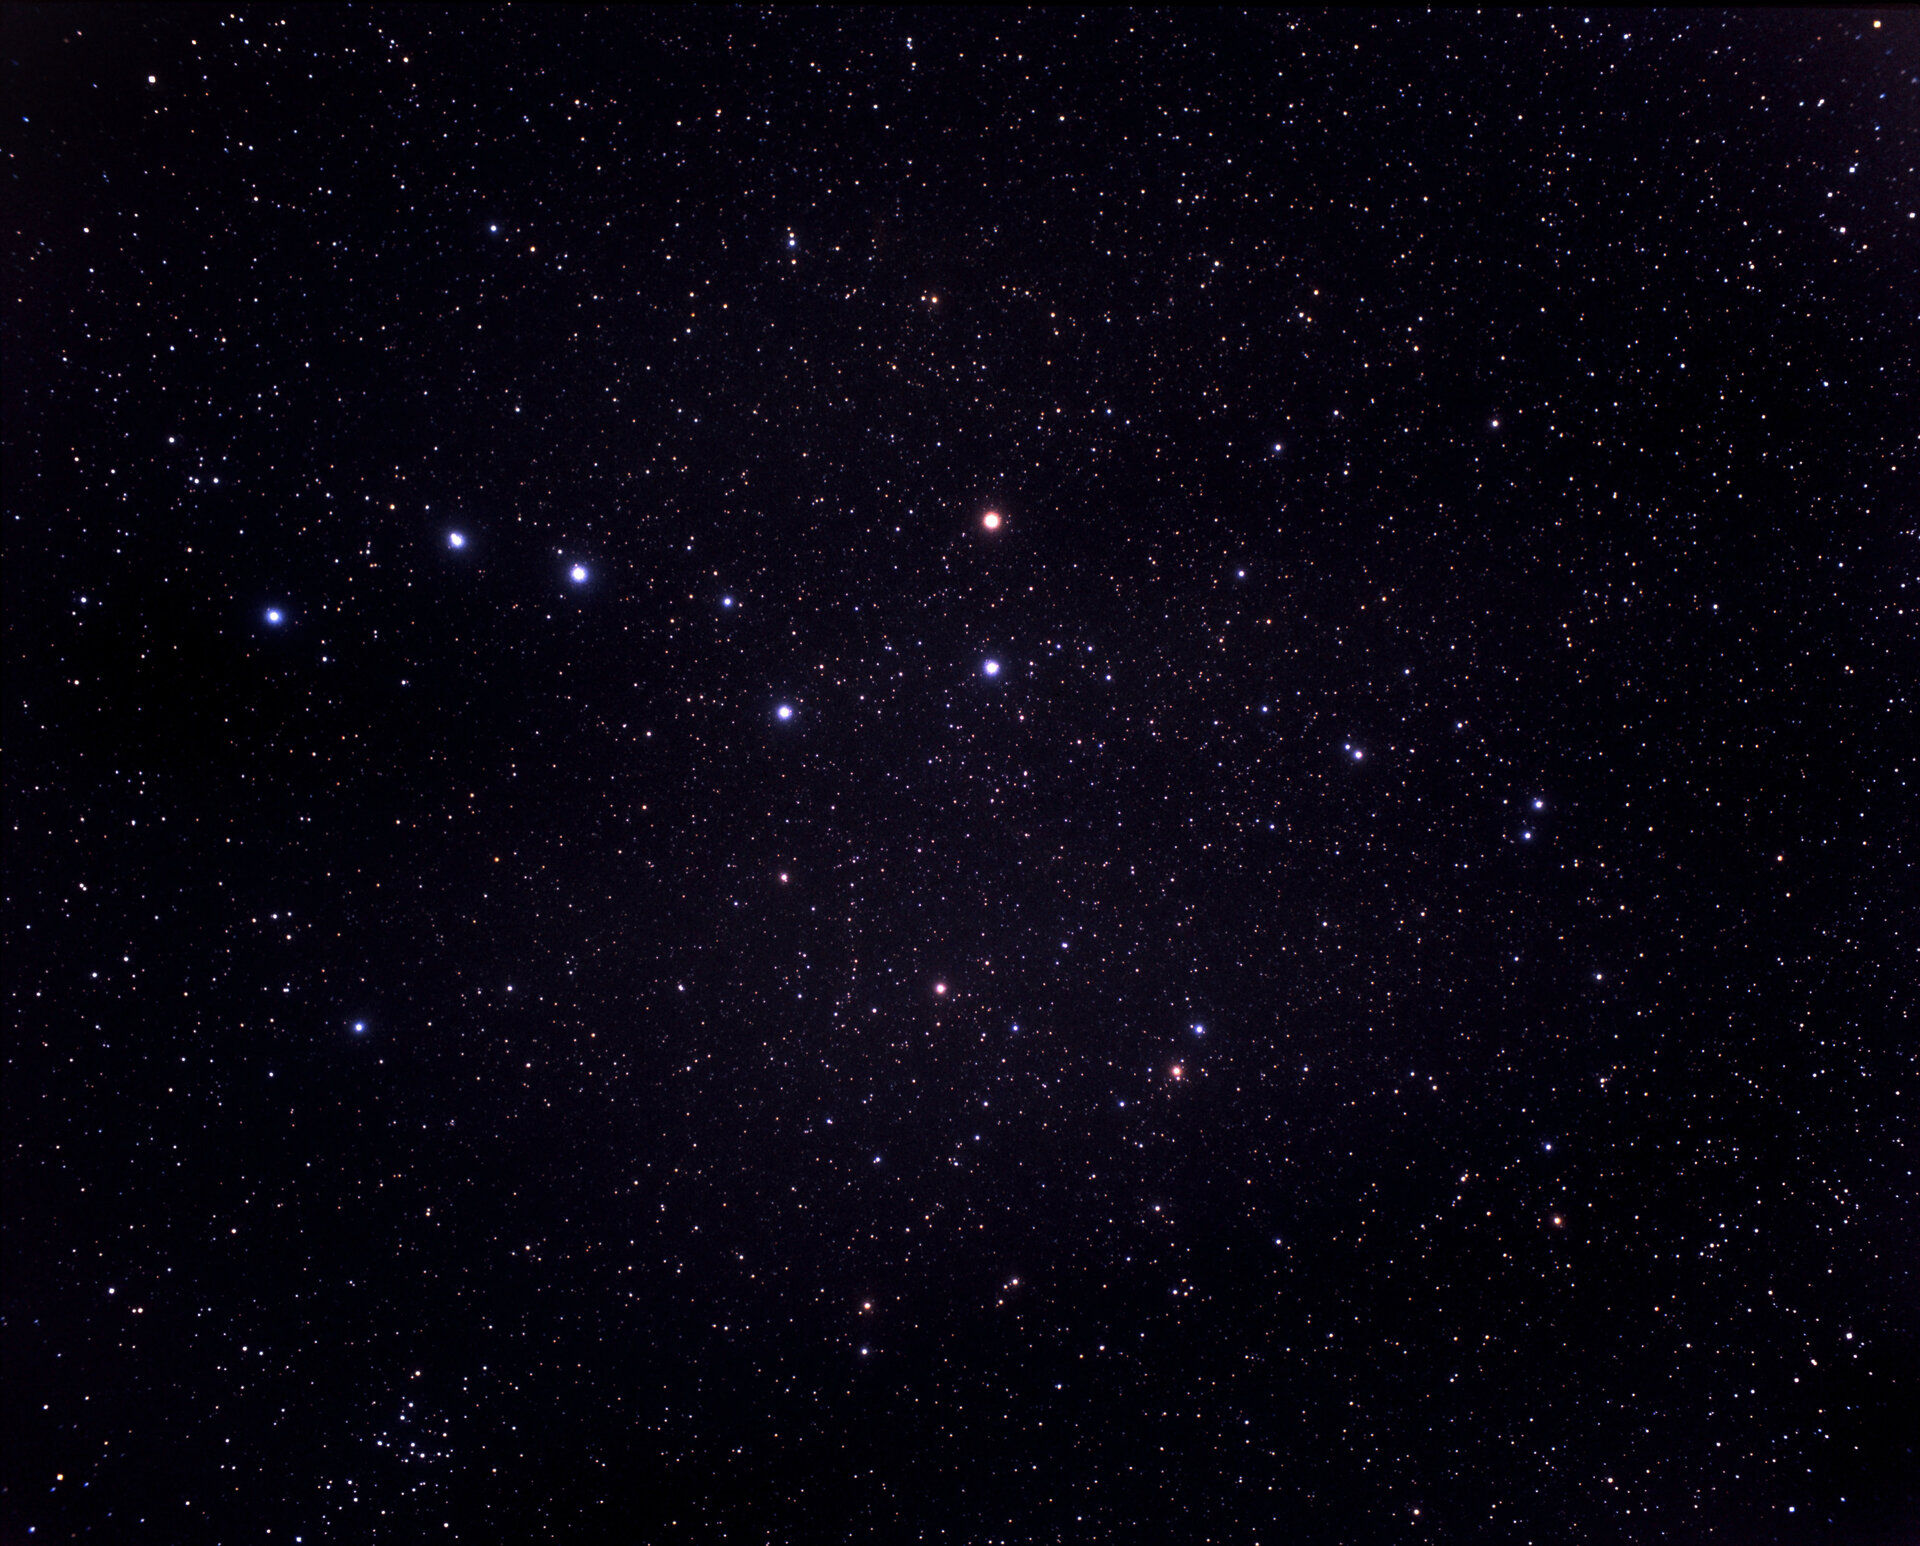 Ursa Major and Coma Berenices, wide-field view